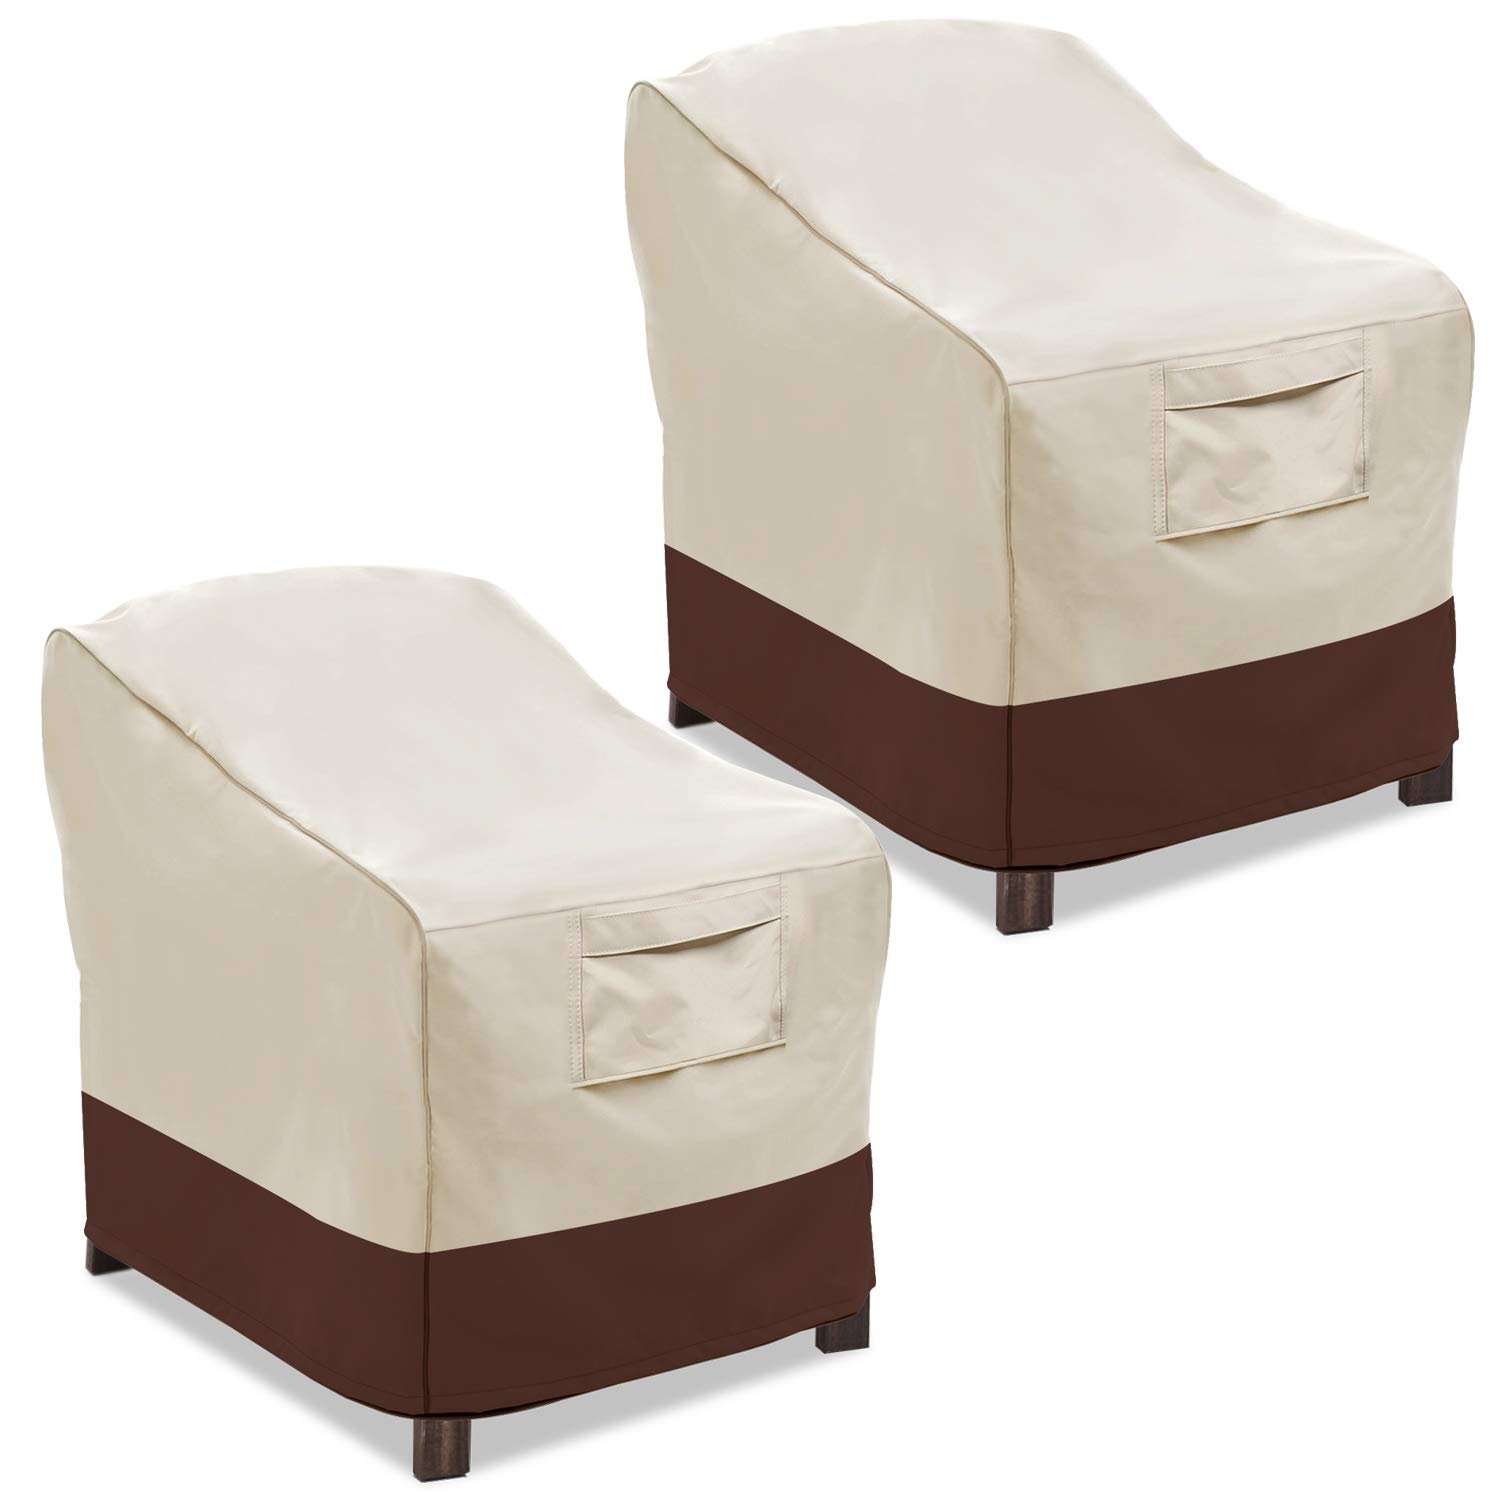 Best Rated in Patio Furniture Covers & Helpful Customer ...